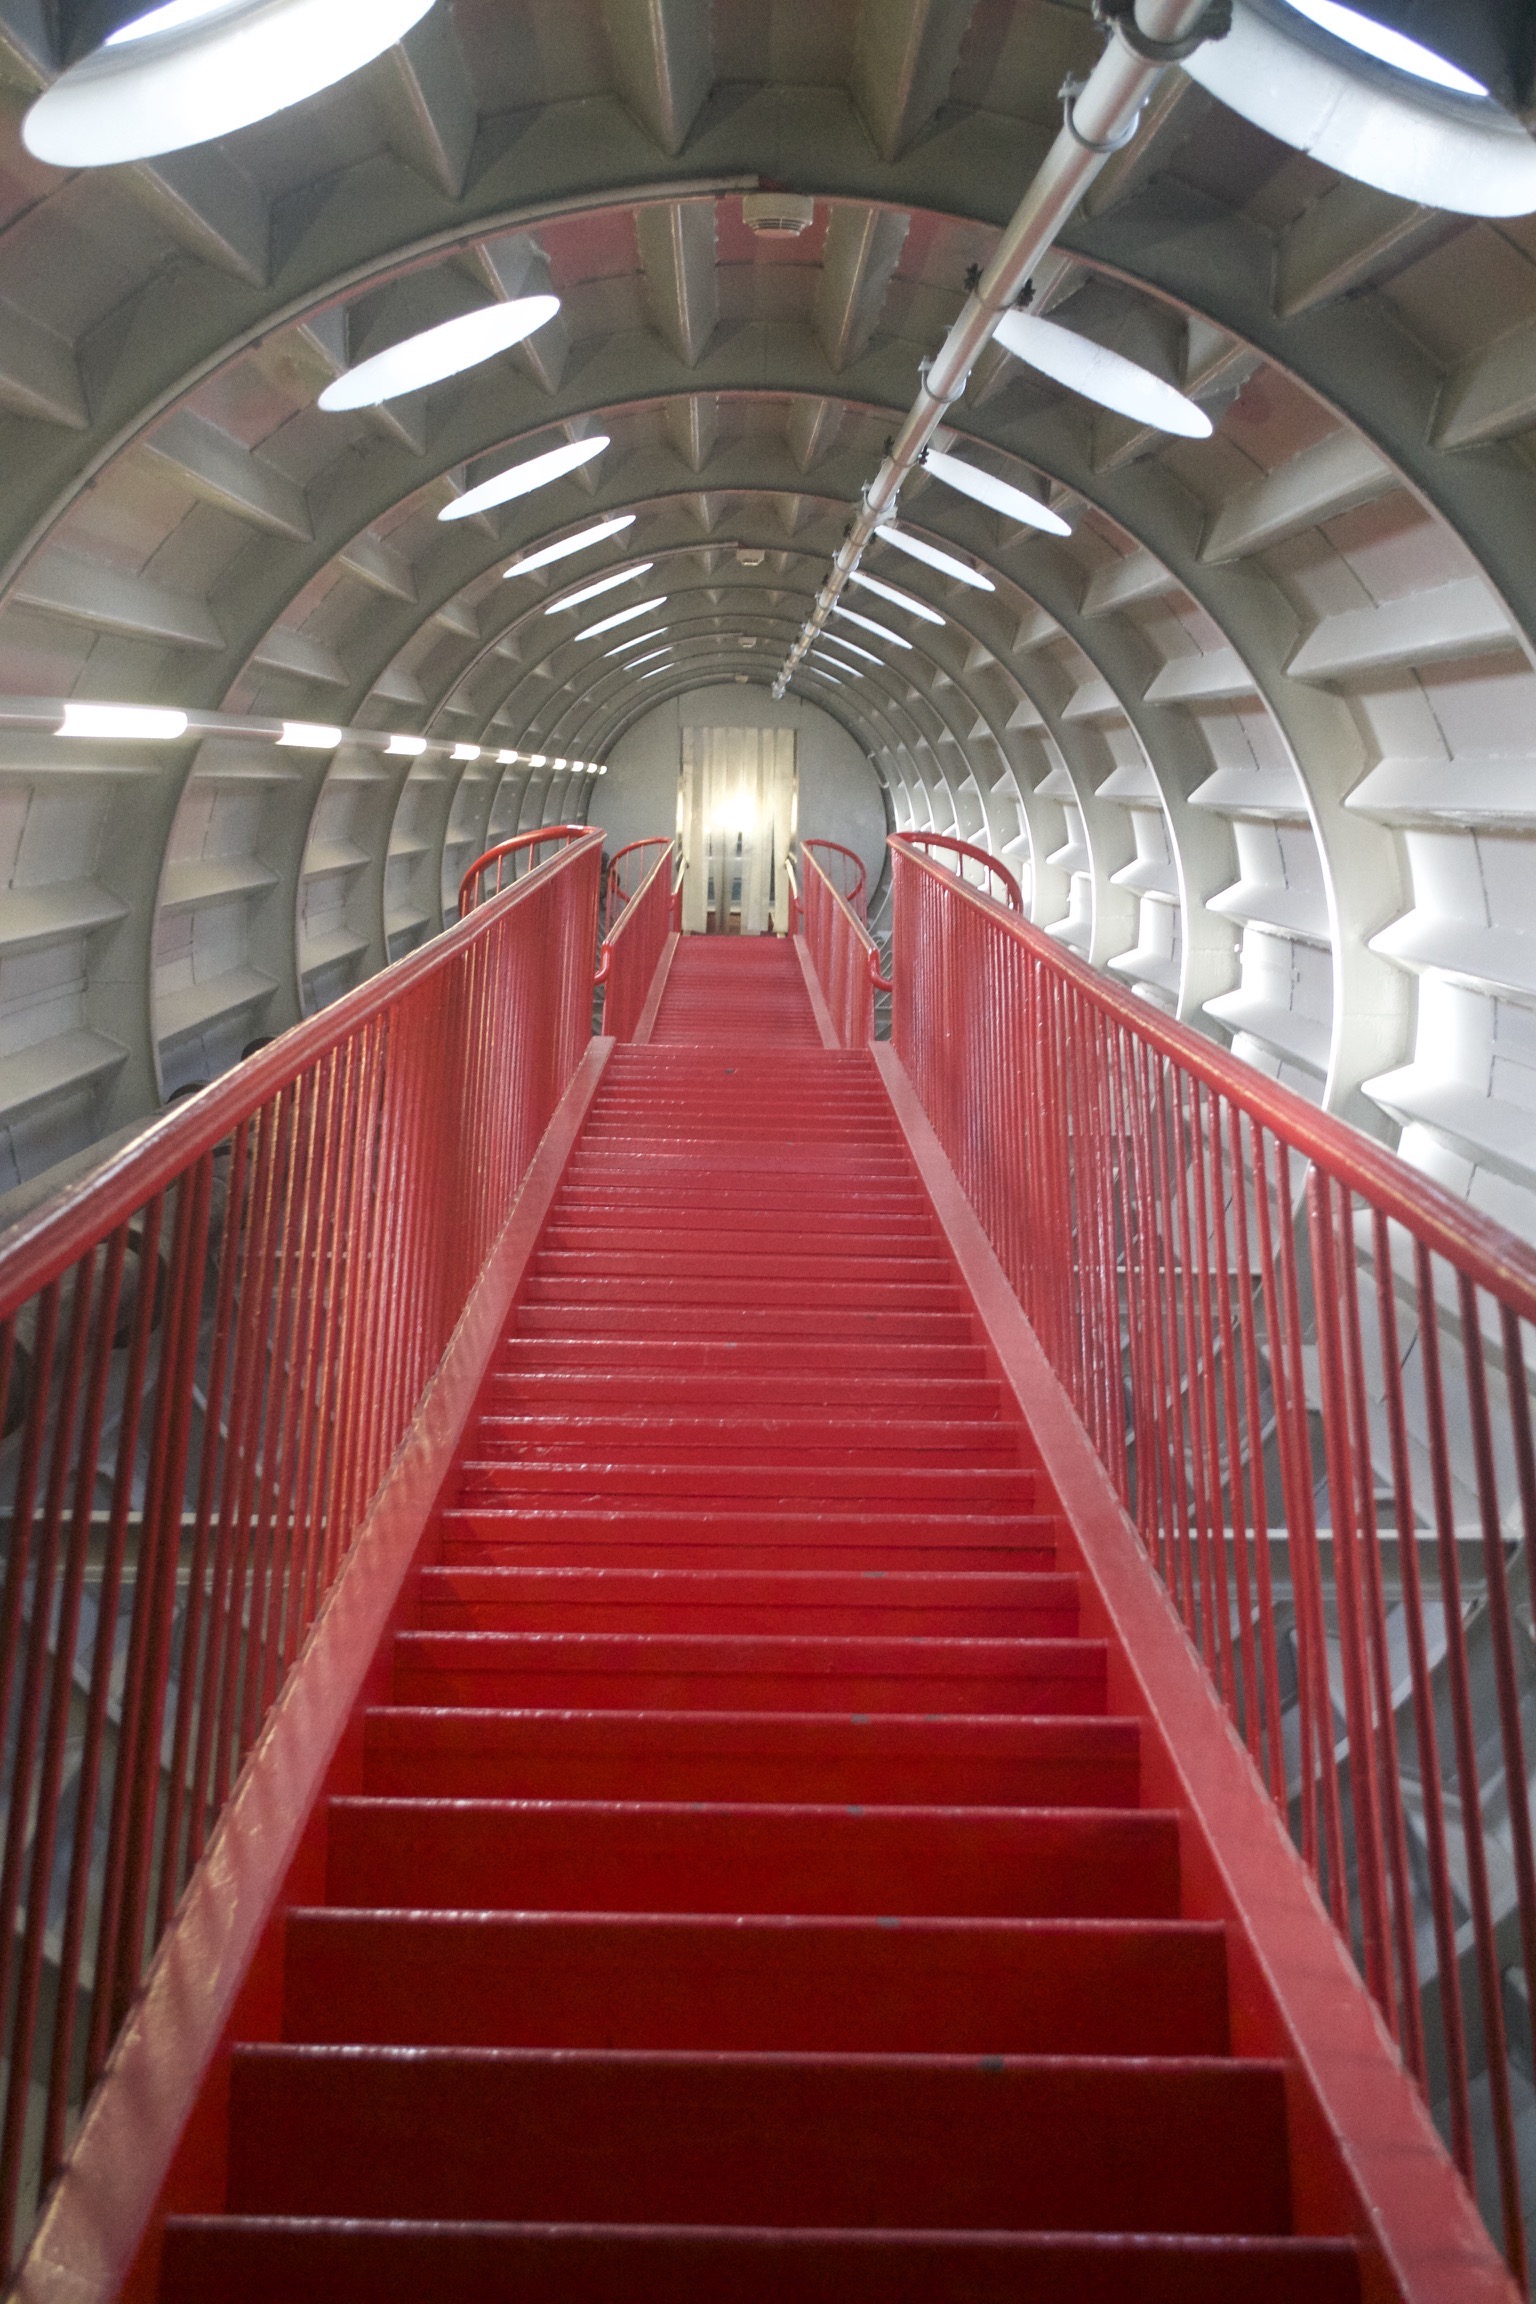 Two flights of red stairs go up a cylindrical tube.